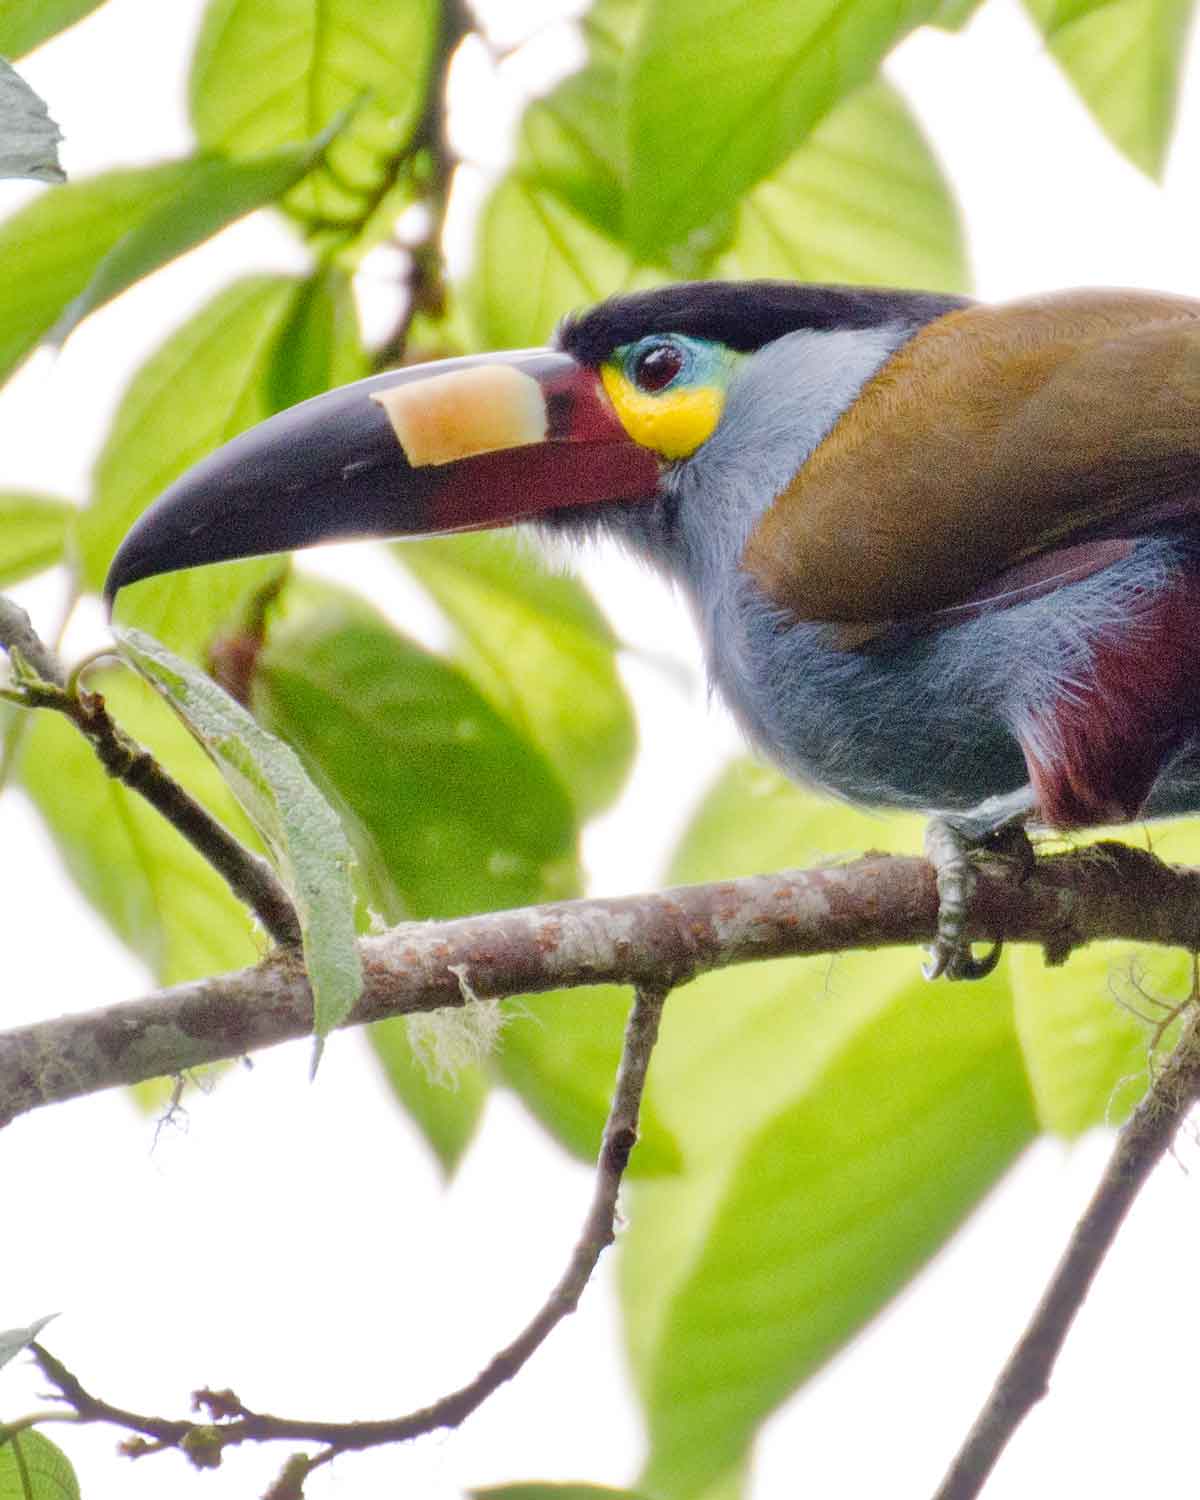 The Plate-billed Mountain Toucan seen at the Bellavista Cloud Forest Reserve | ©Angela Drake